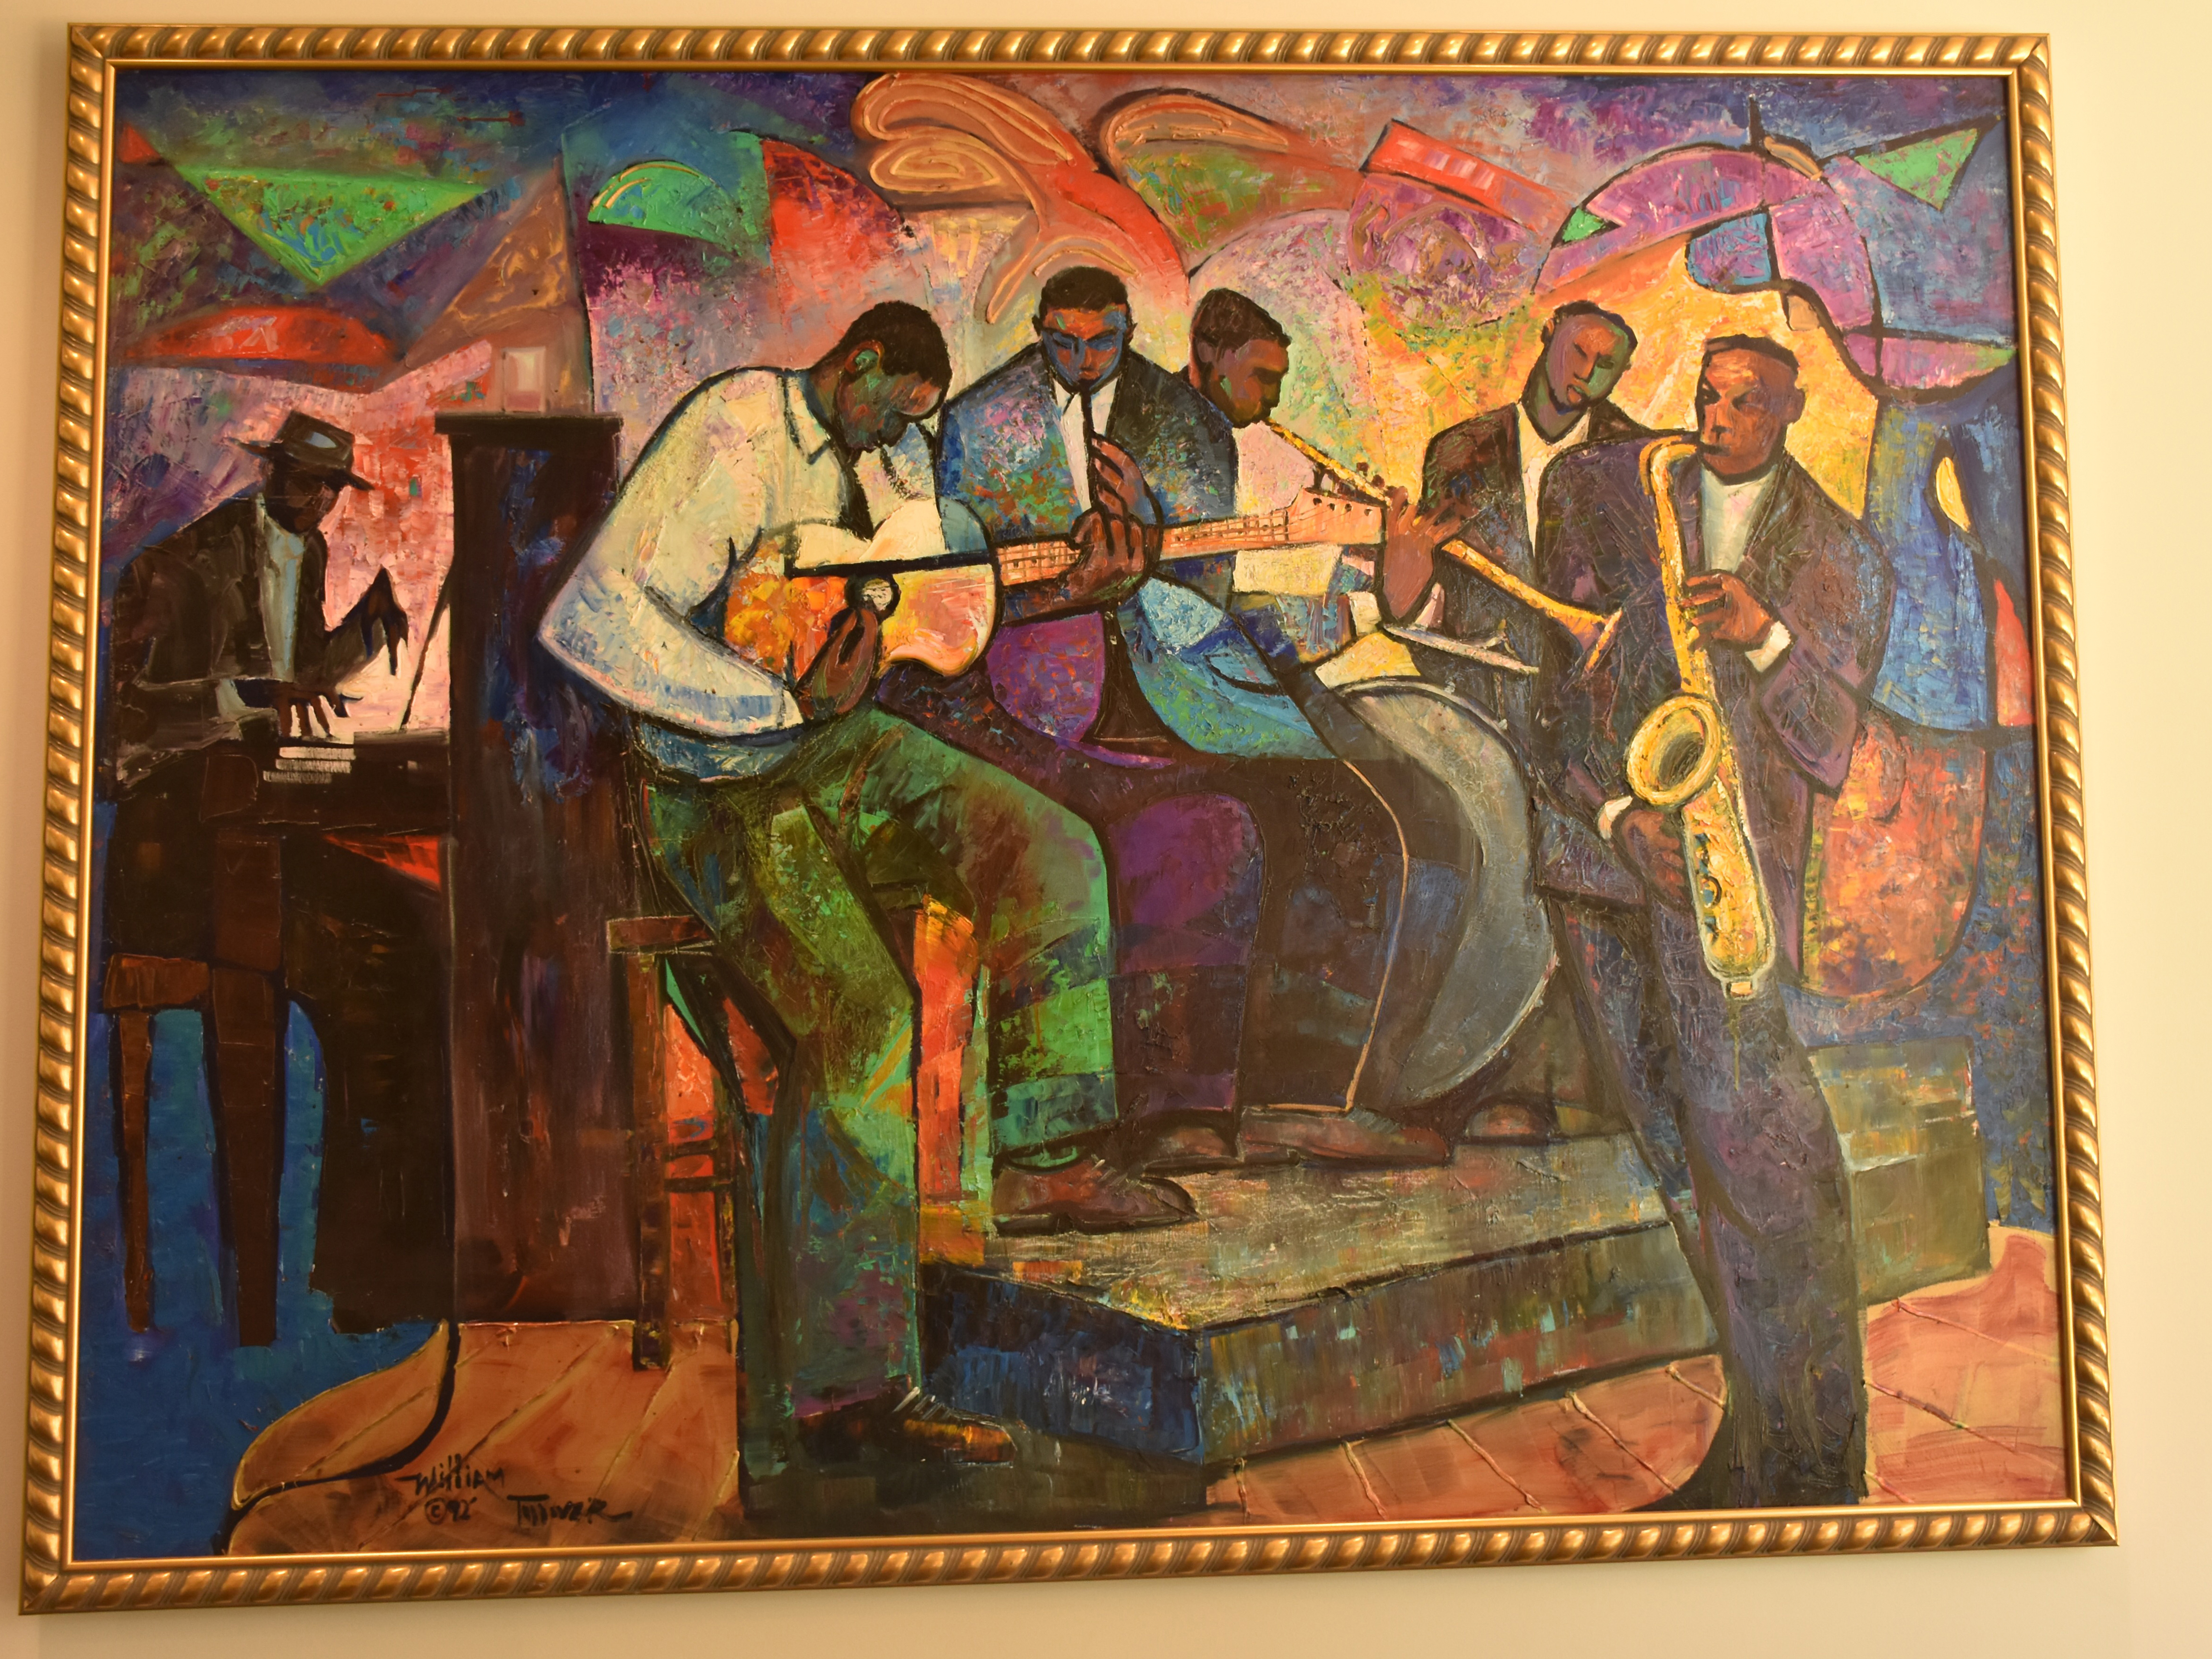 “Big Band” by William Tolliver